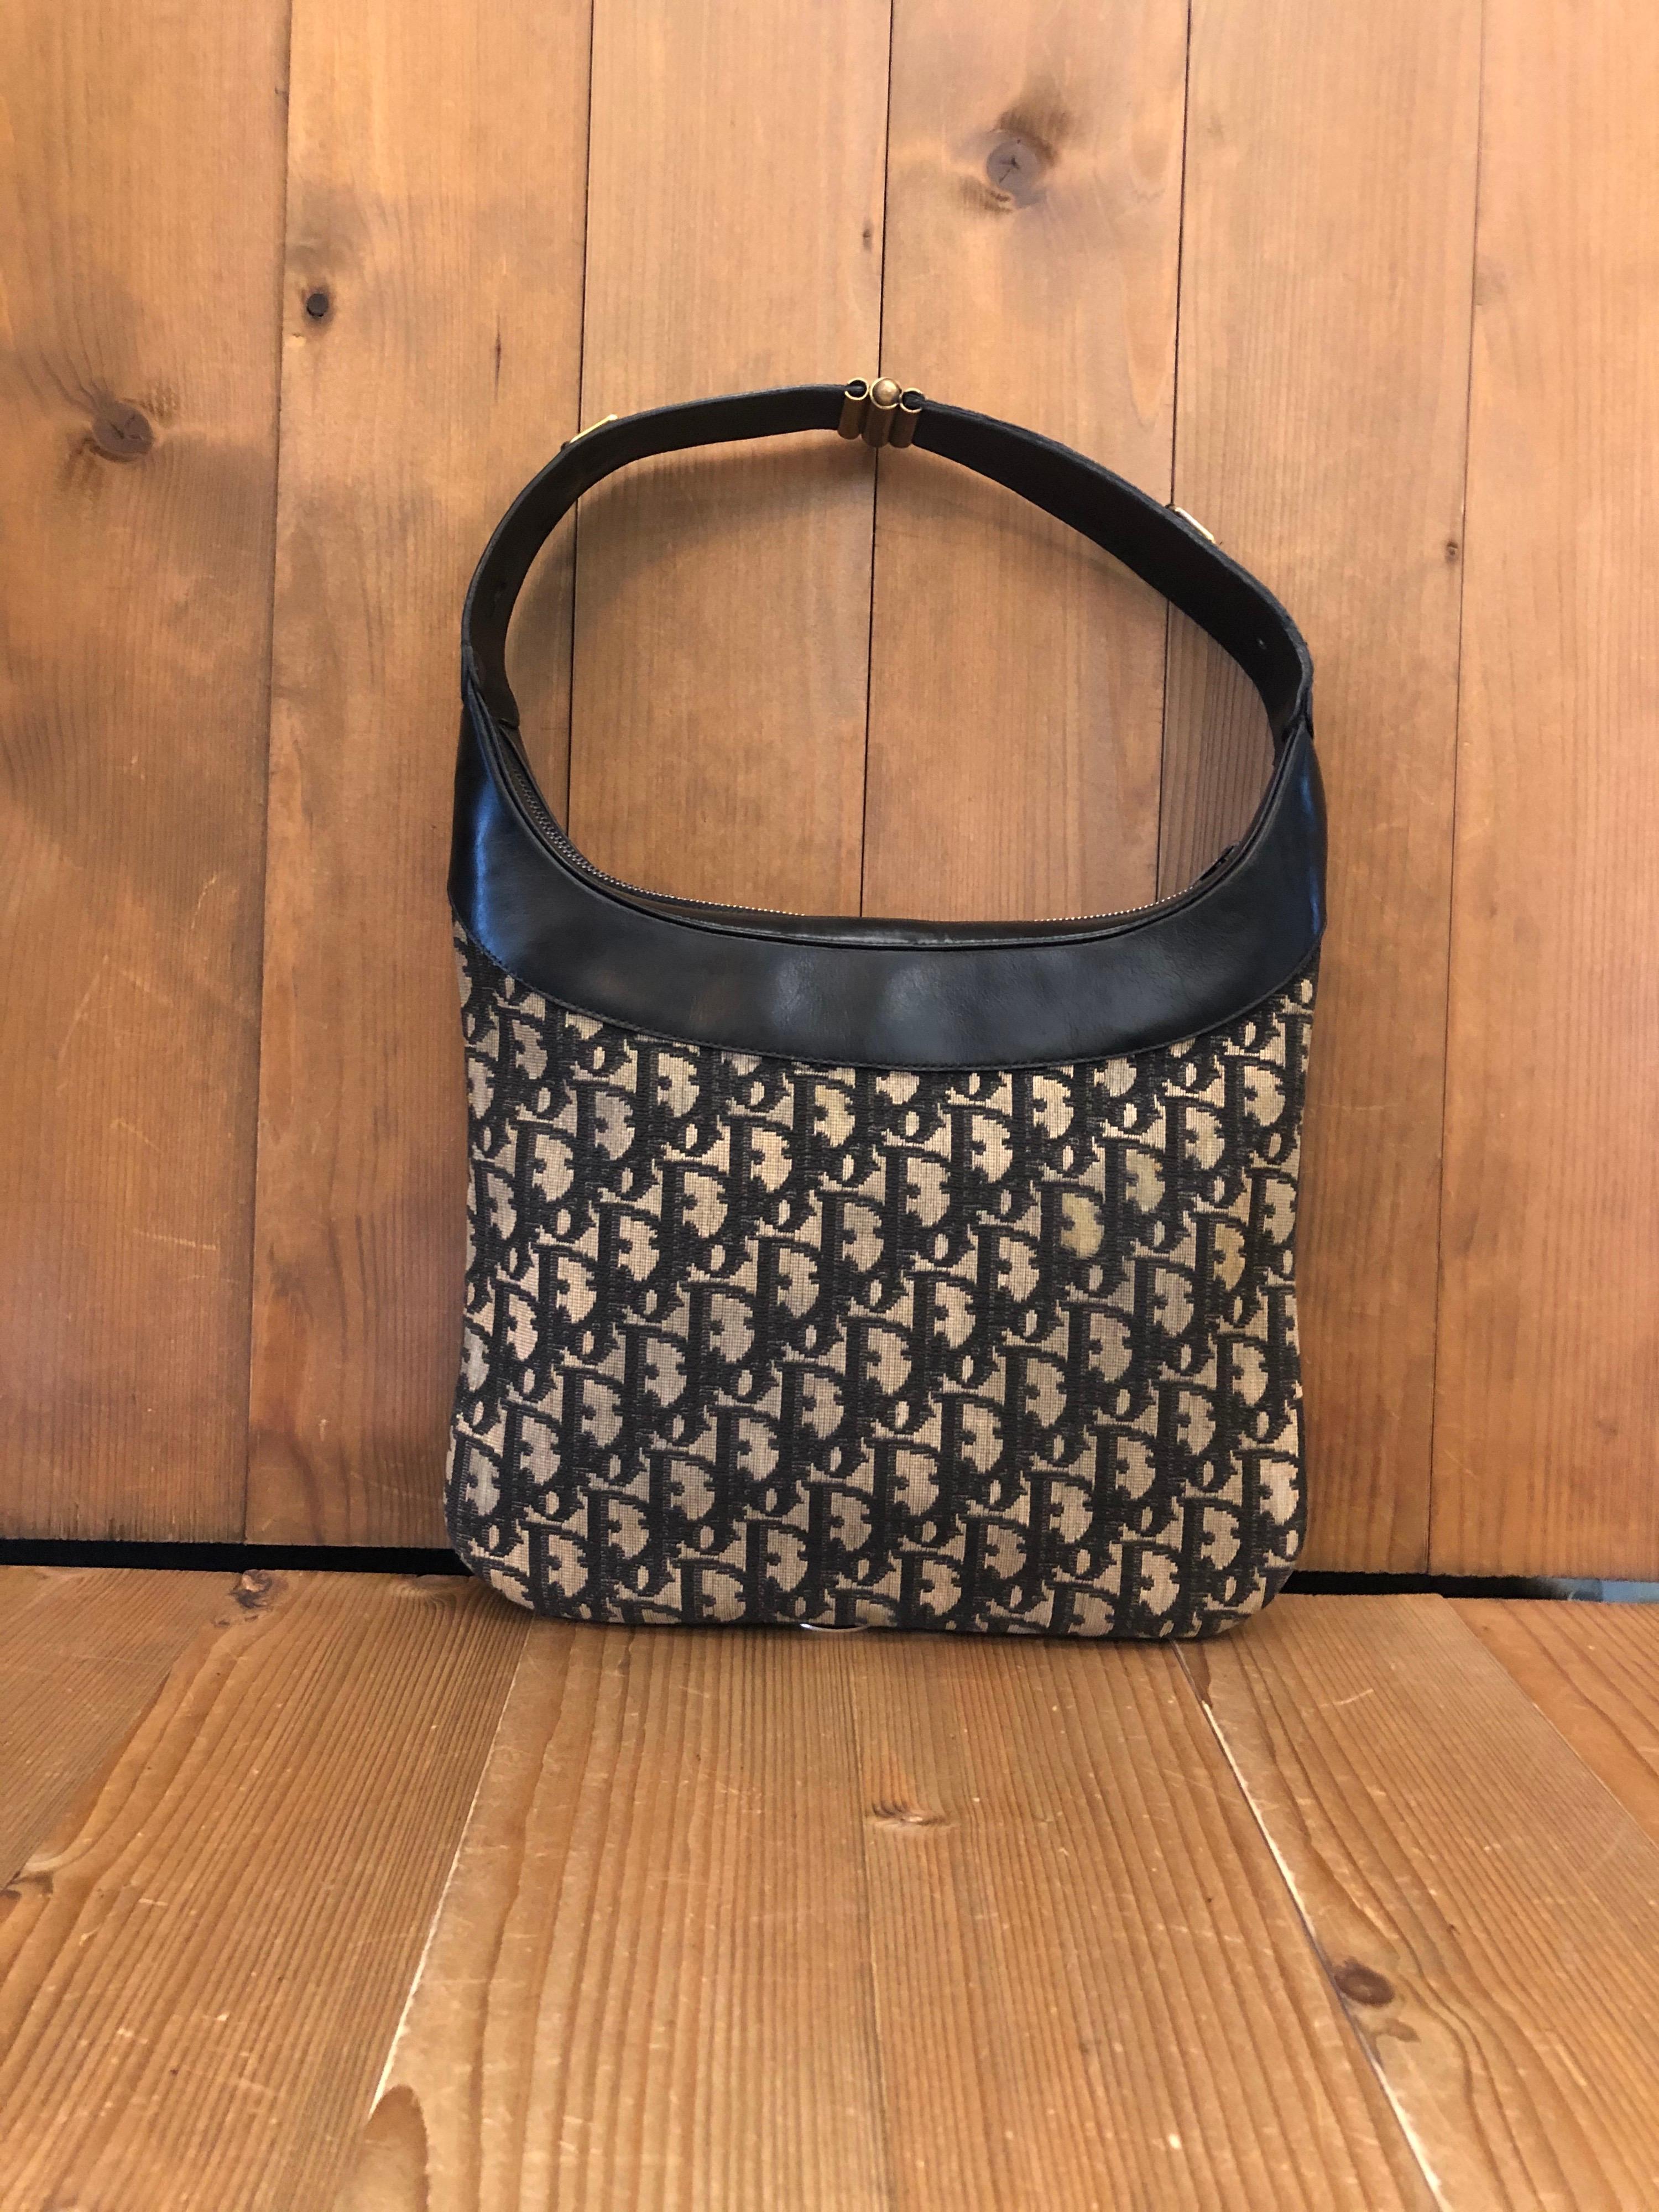 1970s Christian Dior pouch shoulder bag in navy trotter jacquard and leather. Made in France. Measures 10.5 x 8.5 inches
 
Condition - Some signs of wear consistent with age and normal use

Outside: Marks and stains throughout jacquard. Minor marks